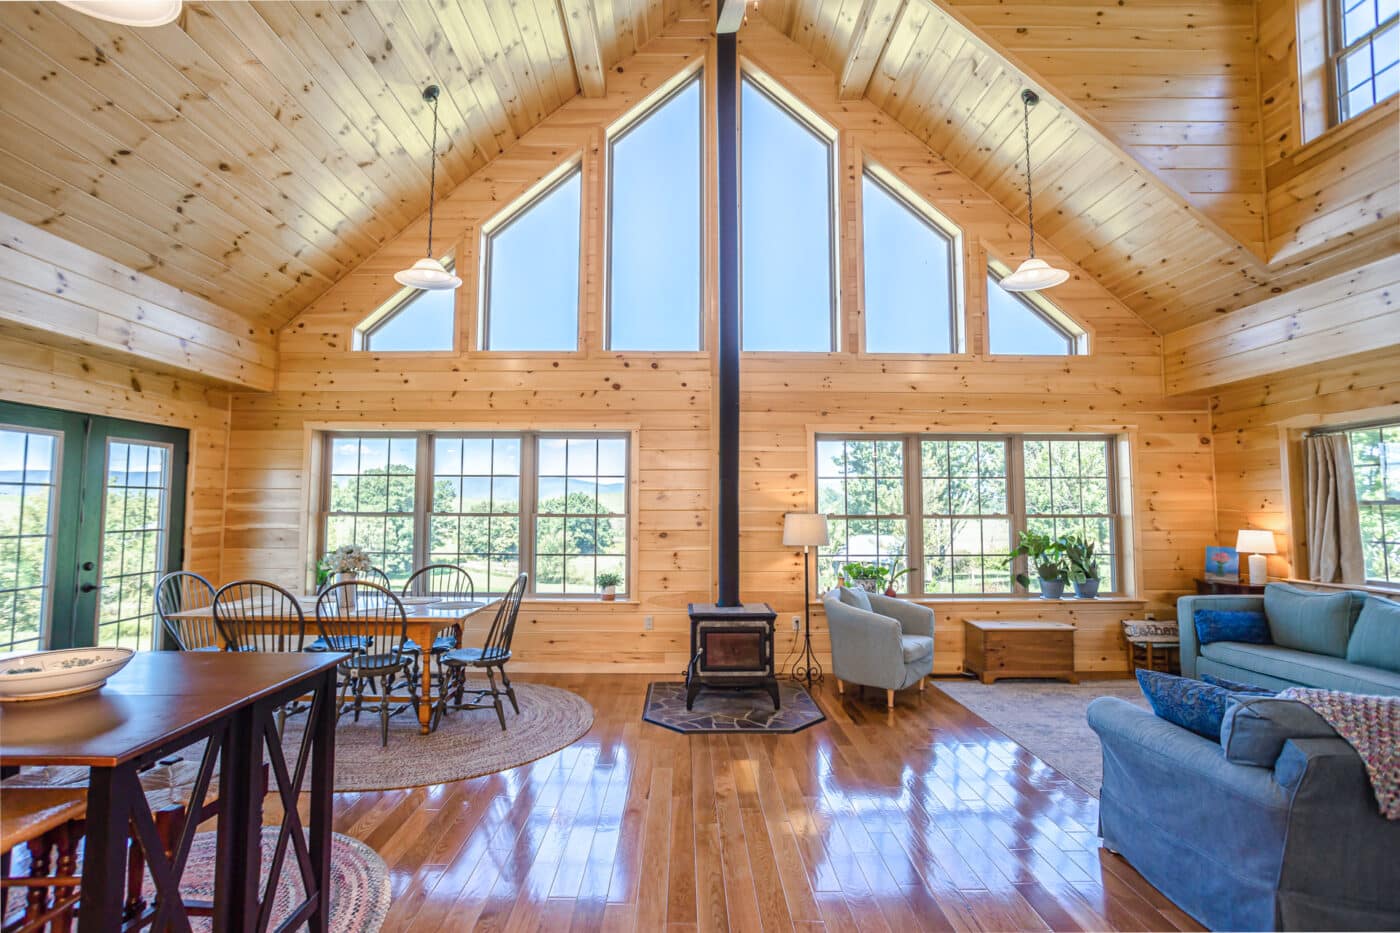 the interior of a log cabin in connecticut